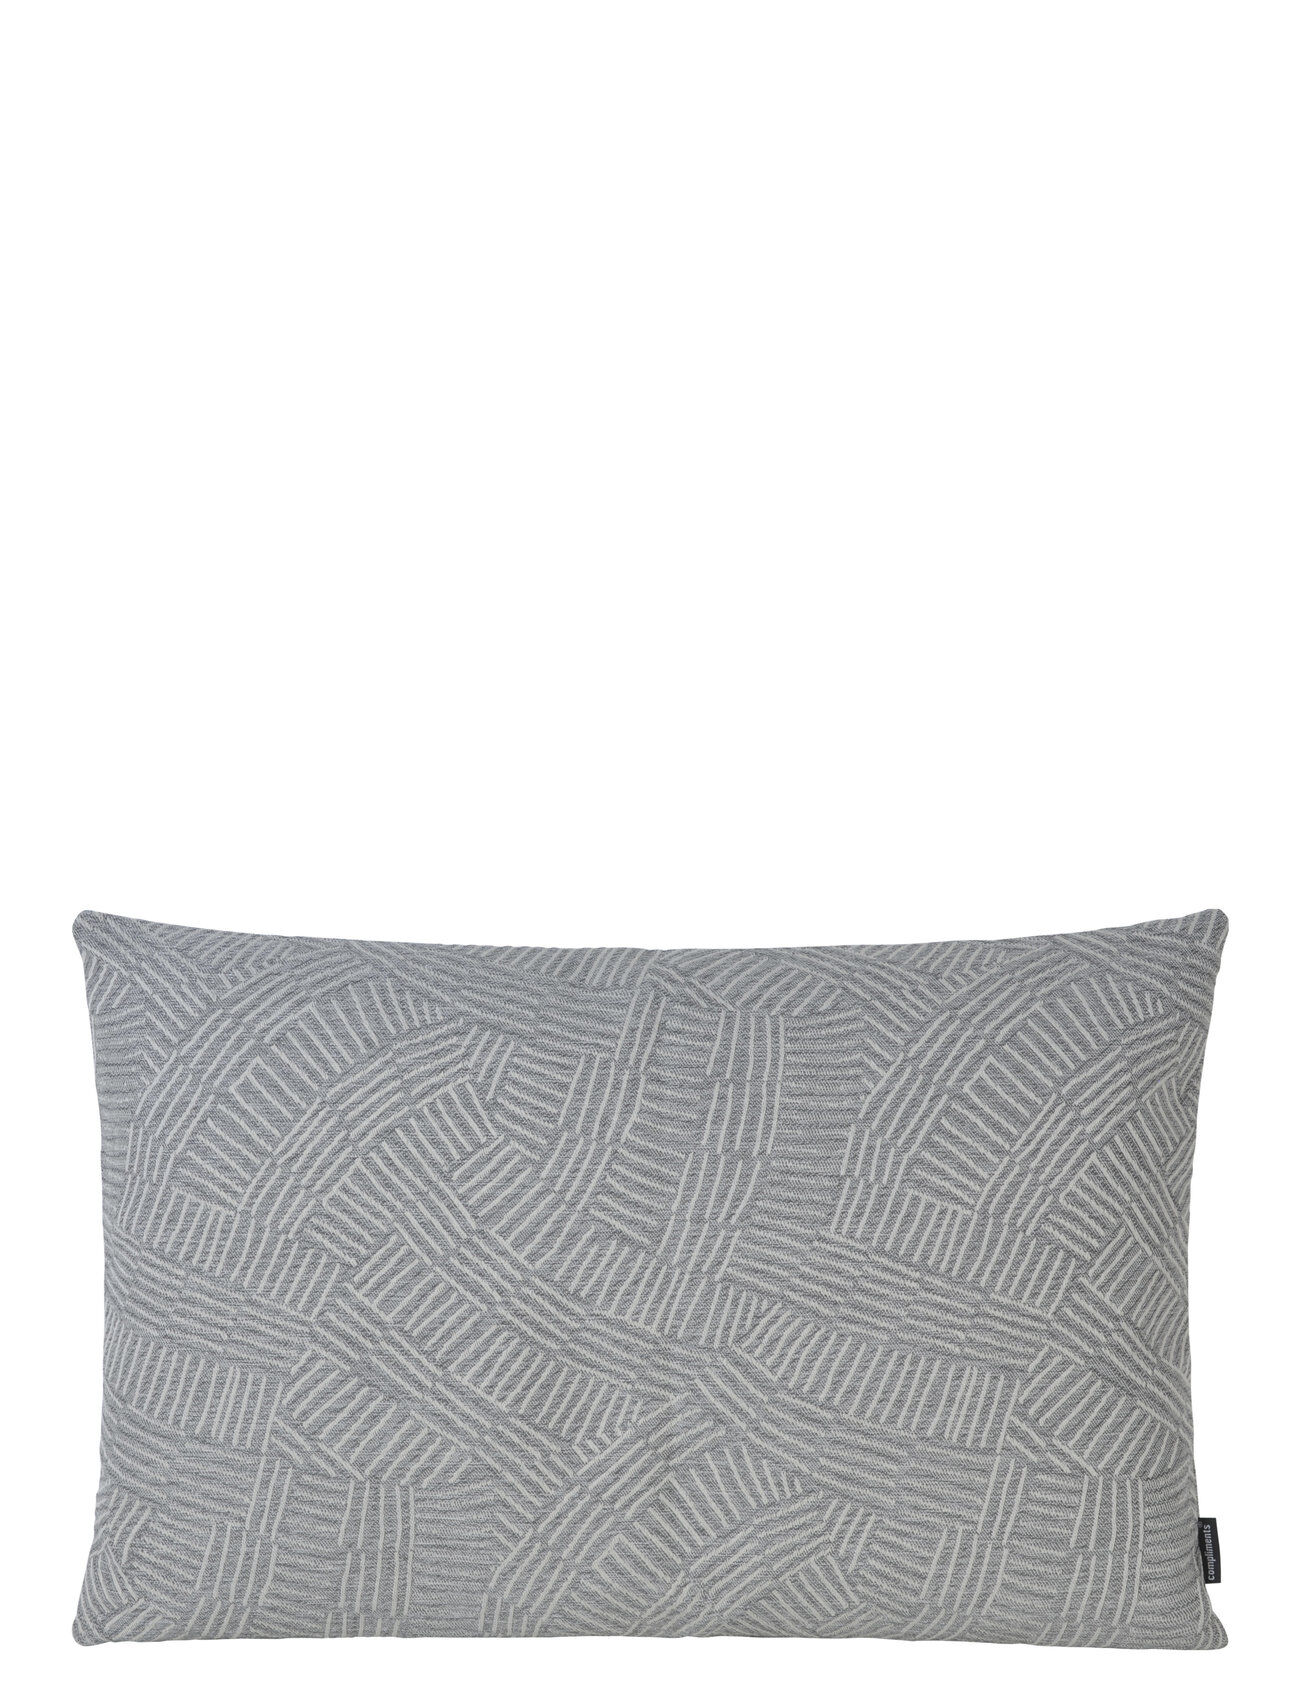 compliments Land 40X60 Cm 2-Pack Home Textiles Cushions & Blankets Cushion Covers Grå Compliments